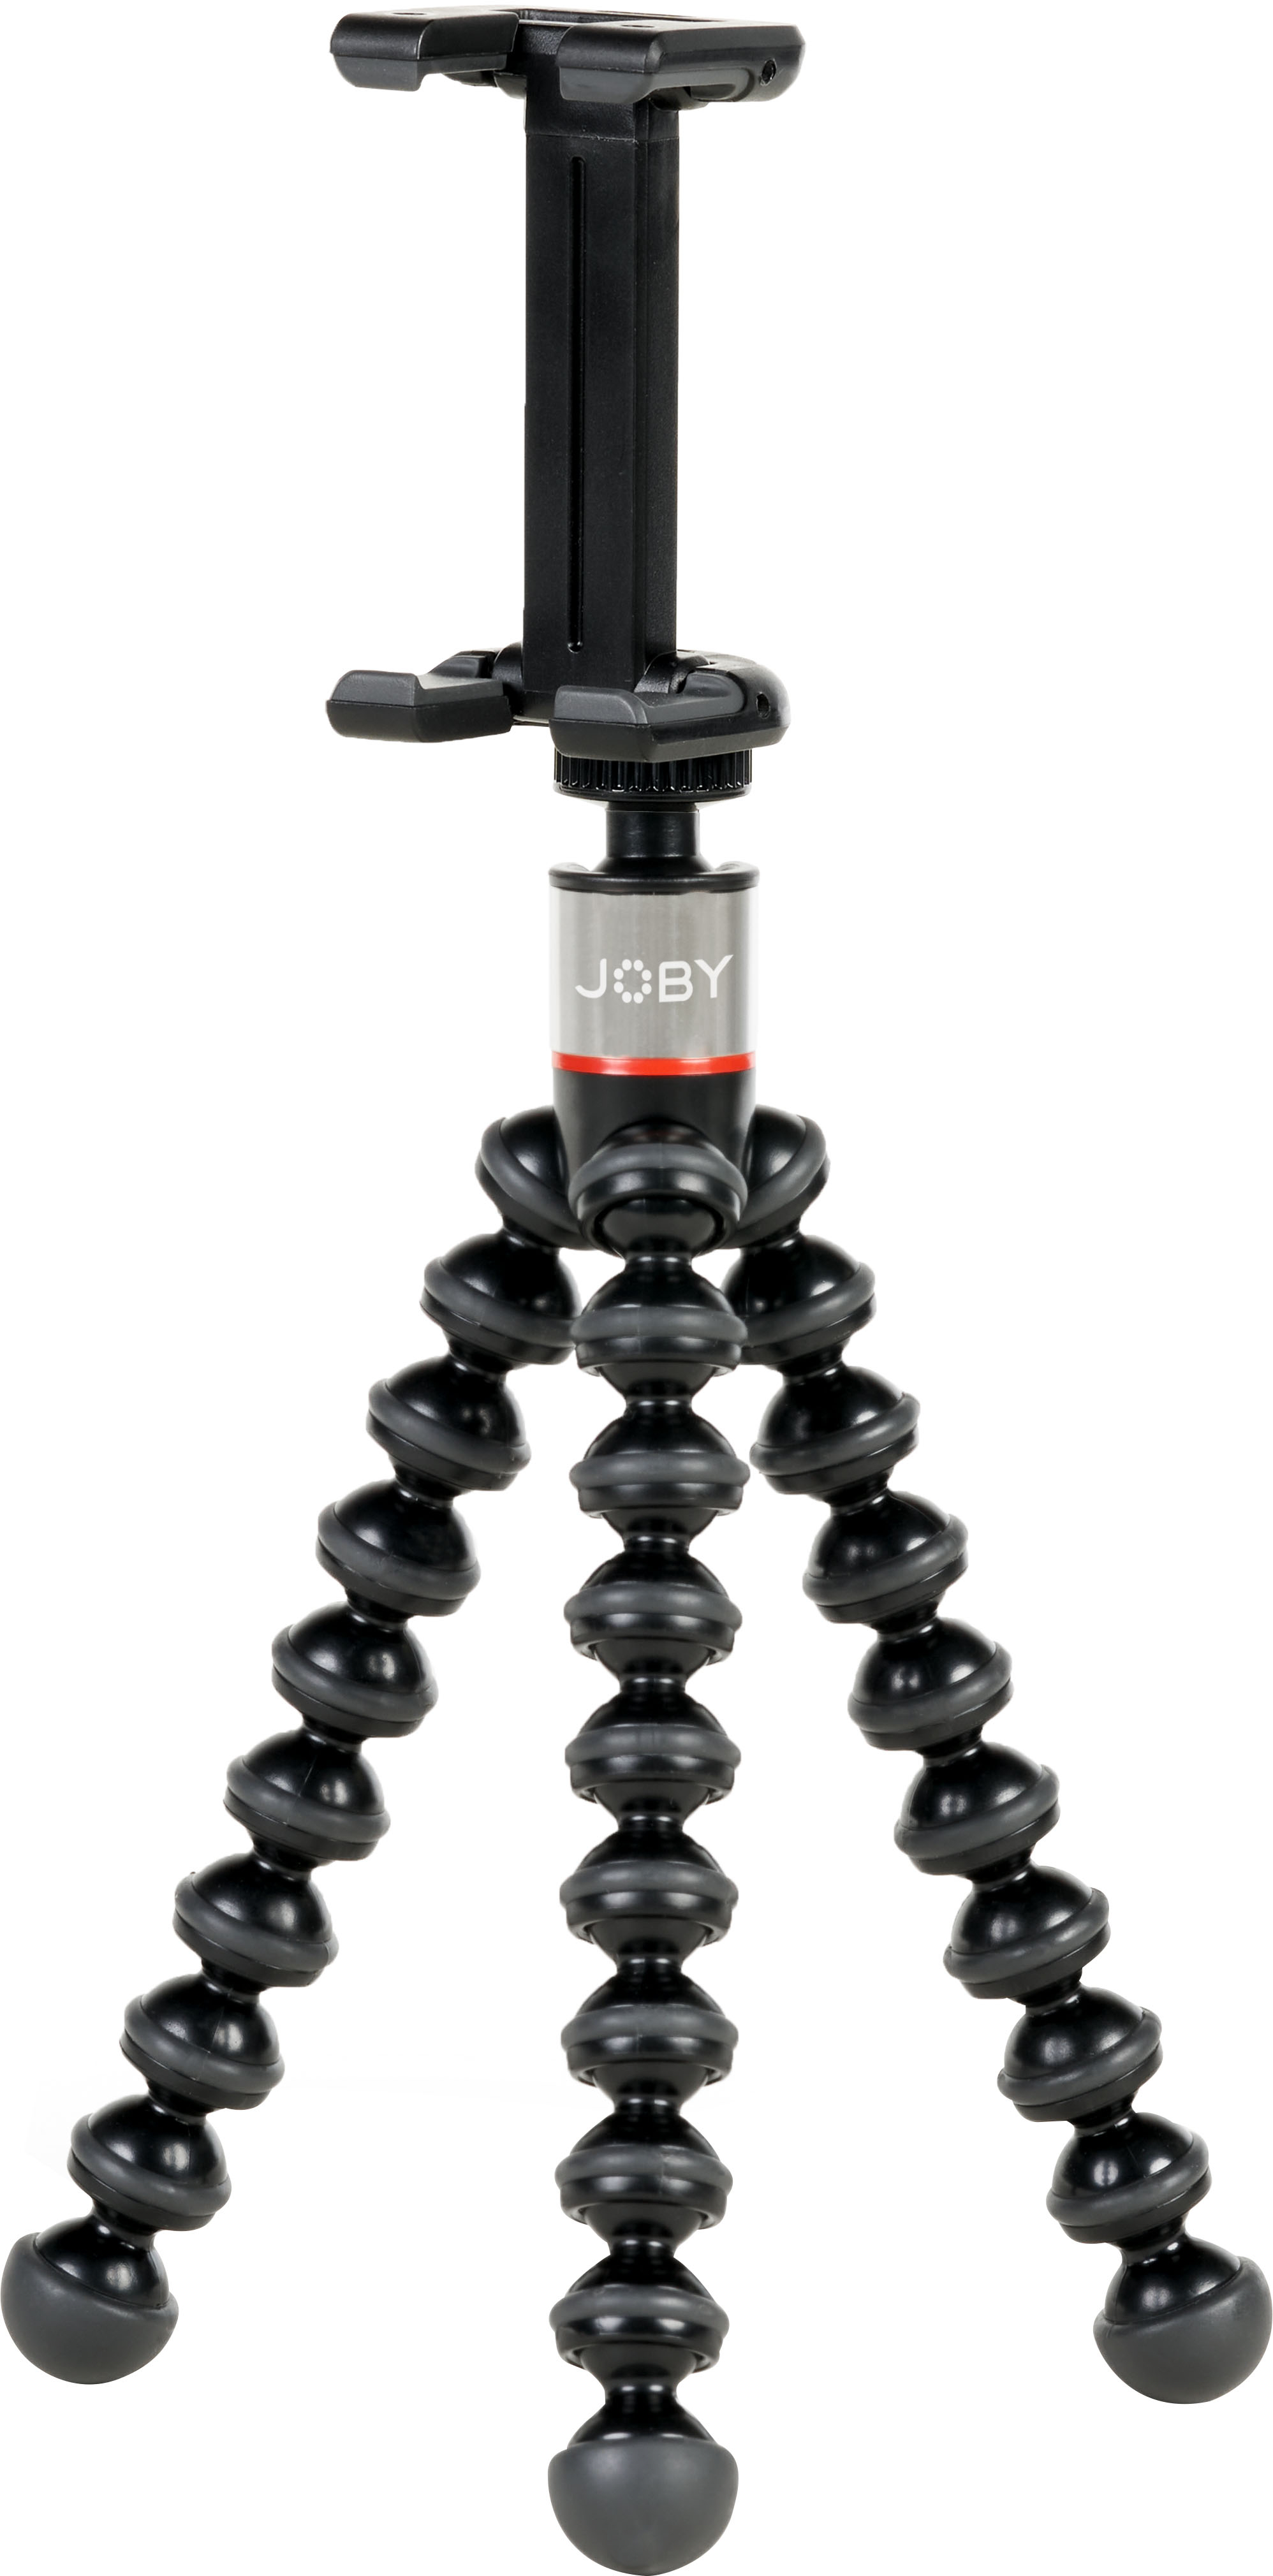 Angle View: JOBY - GripTight ONE GorillaPod Stand - Black